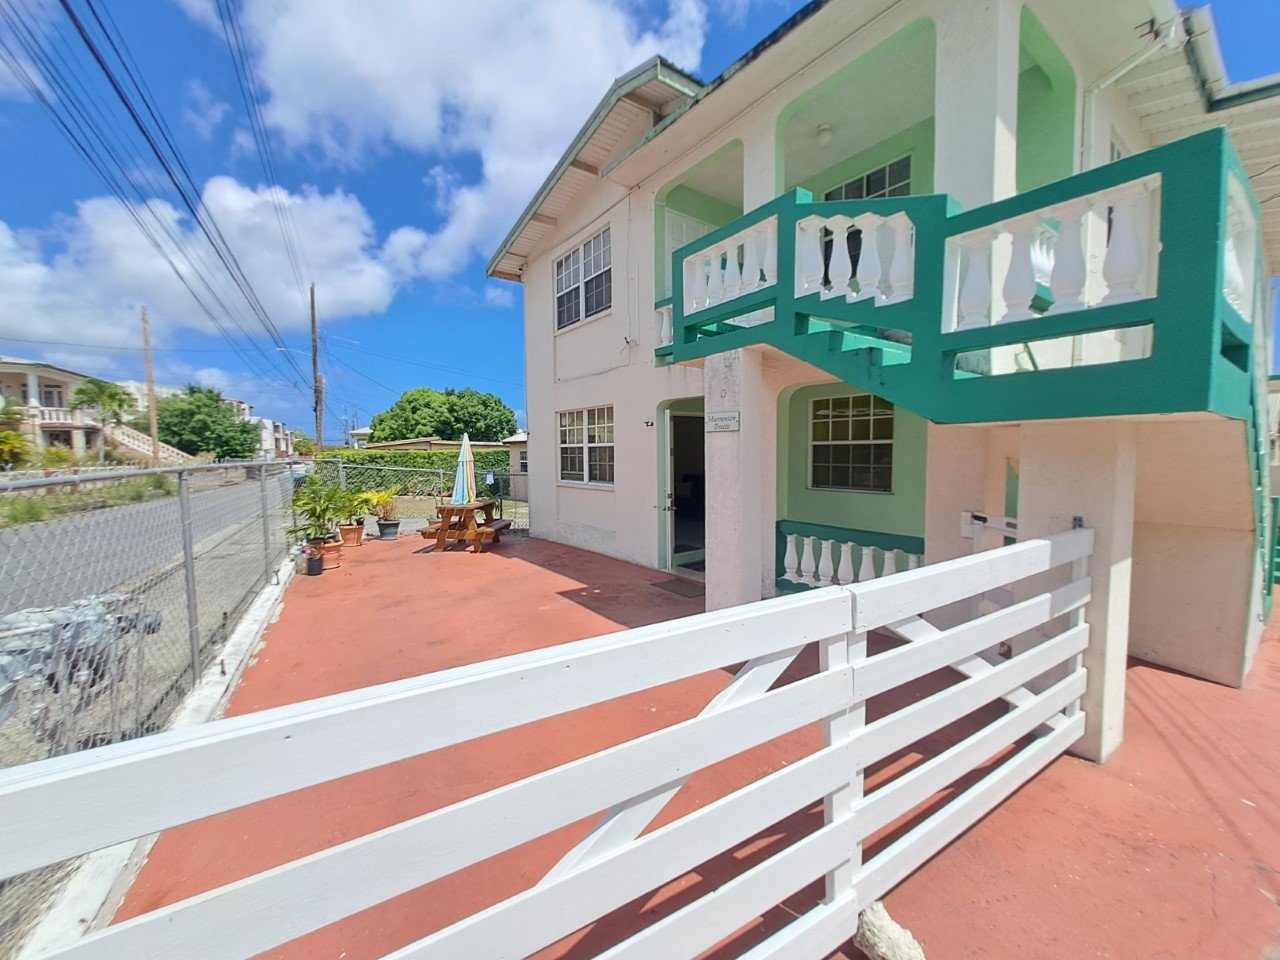 Marrathon Breeze | Amity Lodge Christ Church | Apartment for Rent in Barbados